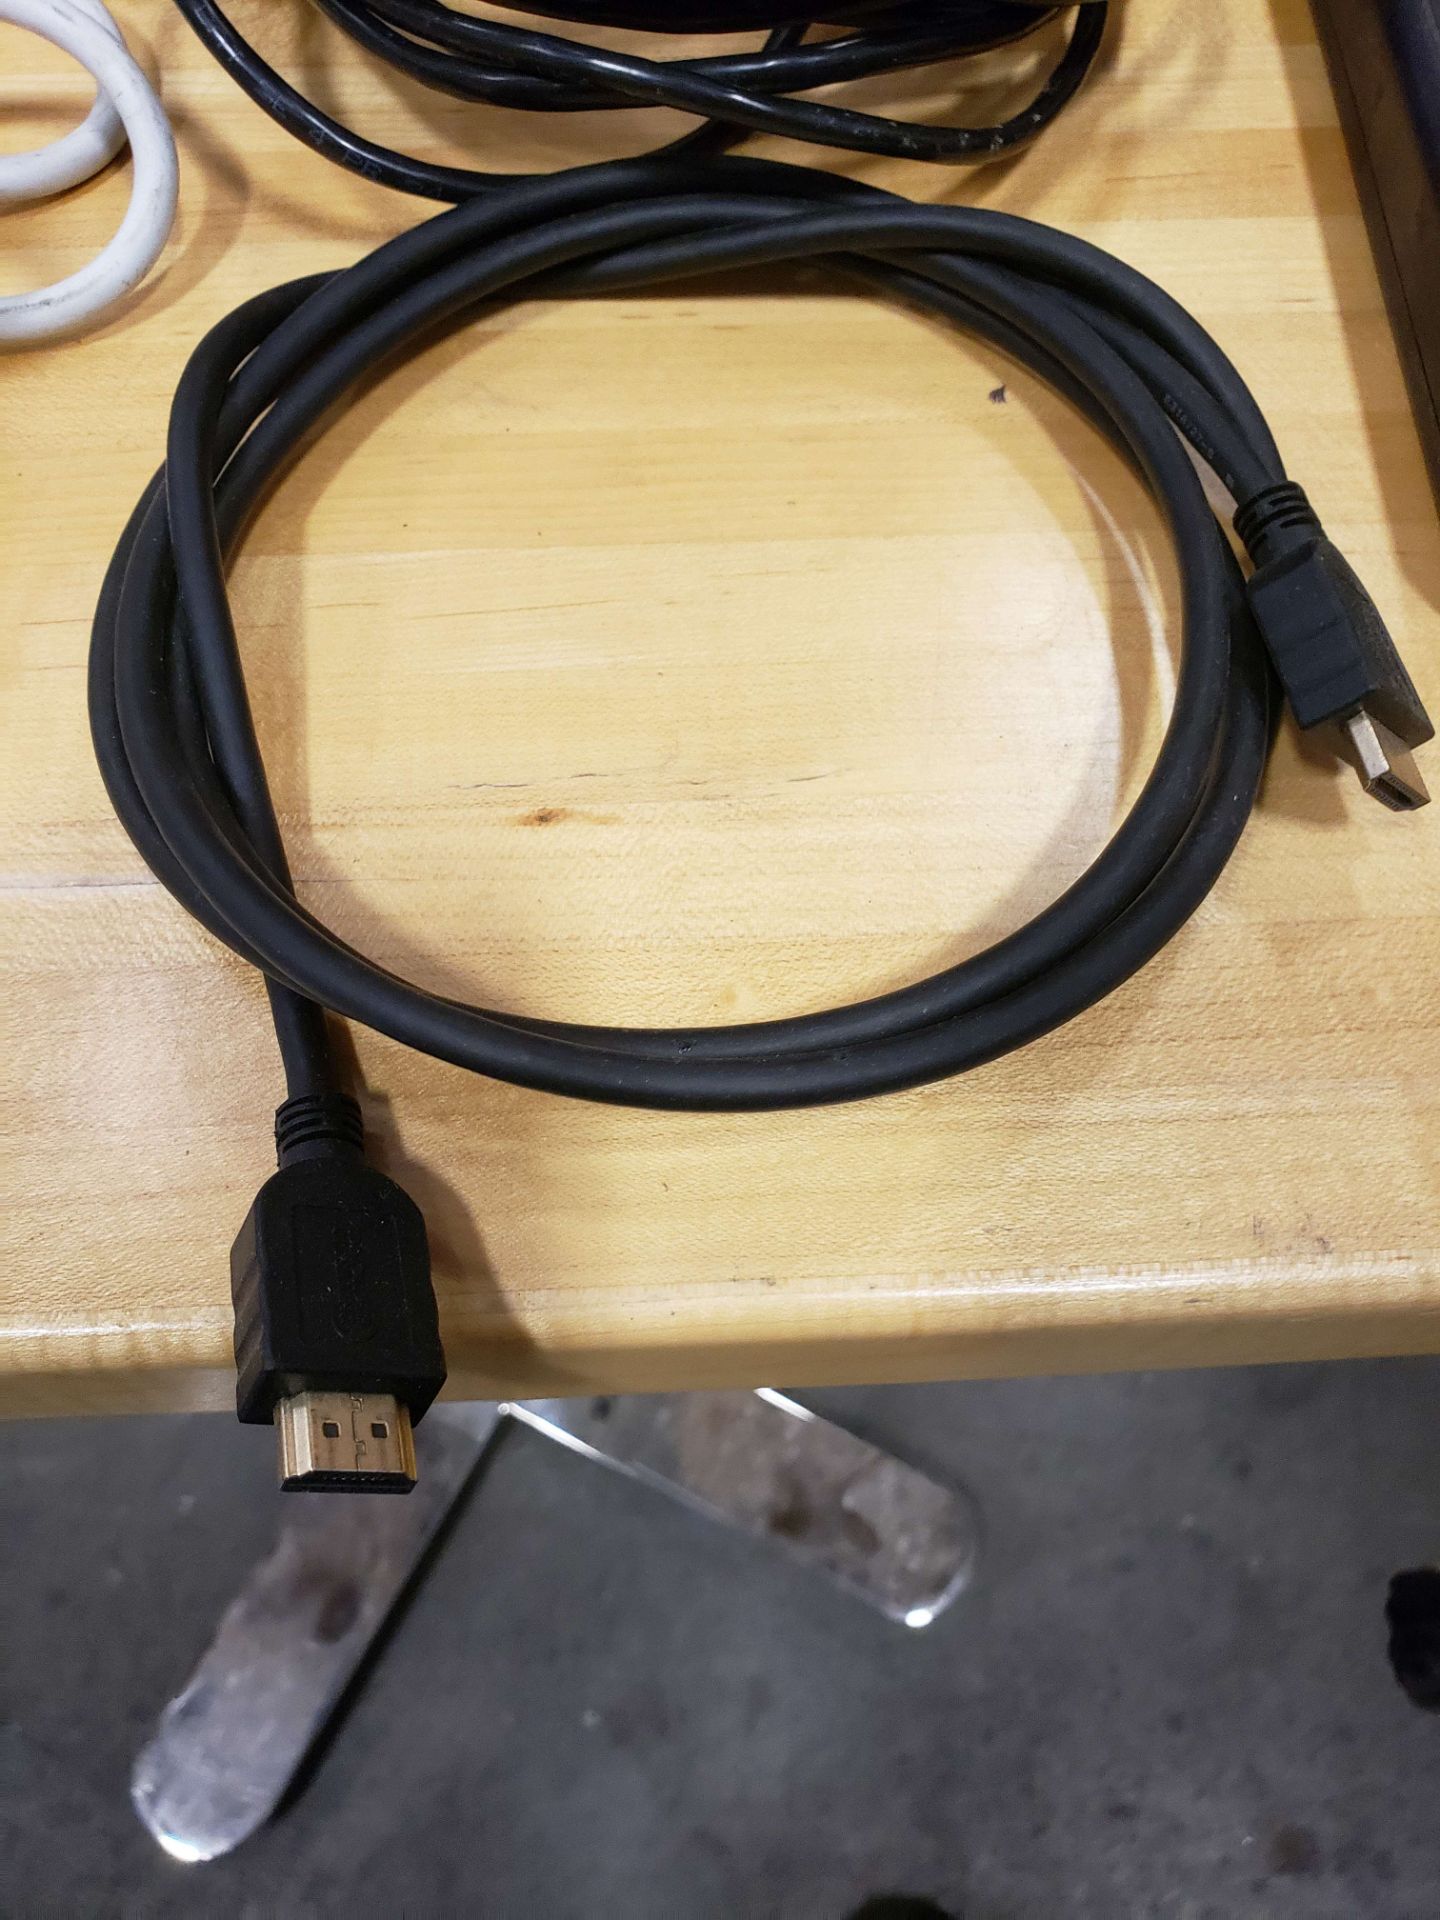 Assorted Cables & Power Bars - 1 Lot - Image 3 of 6